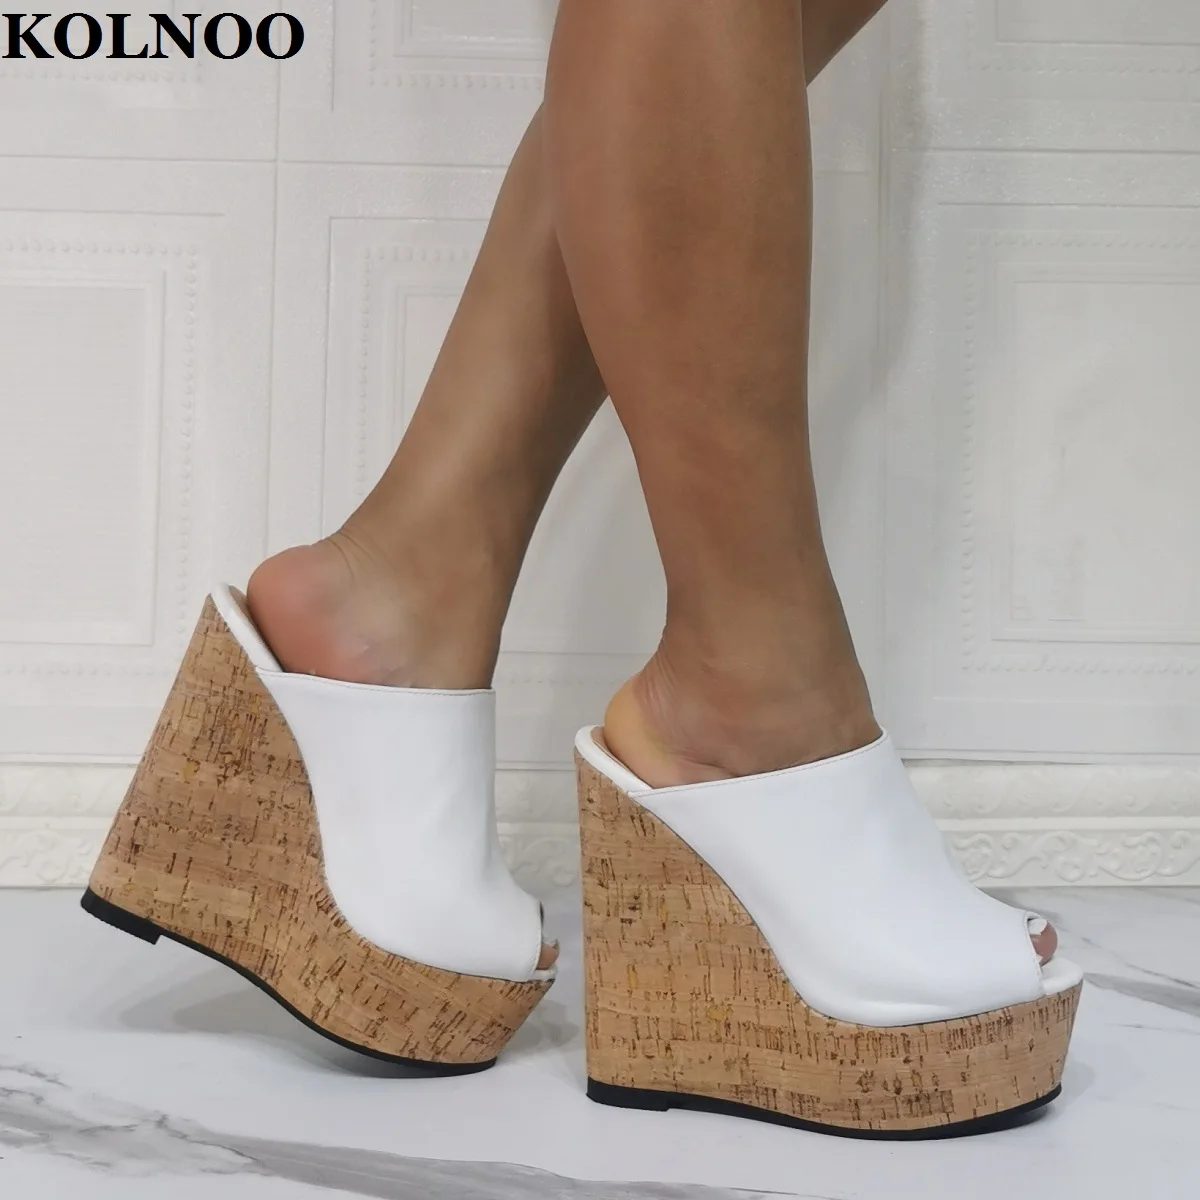 

KOLNOO New Real Photos Womens Wedges Heels Slippers Faux Leather Peep-Toe Wedding Sexy Party Prom Evening Fashion Sandals Shoes